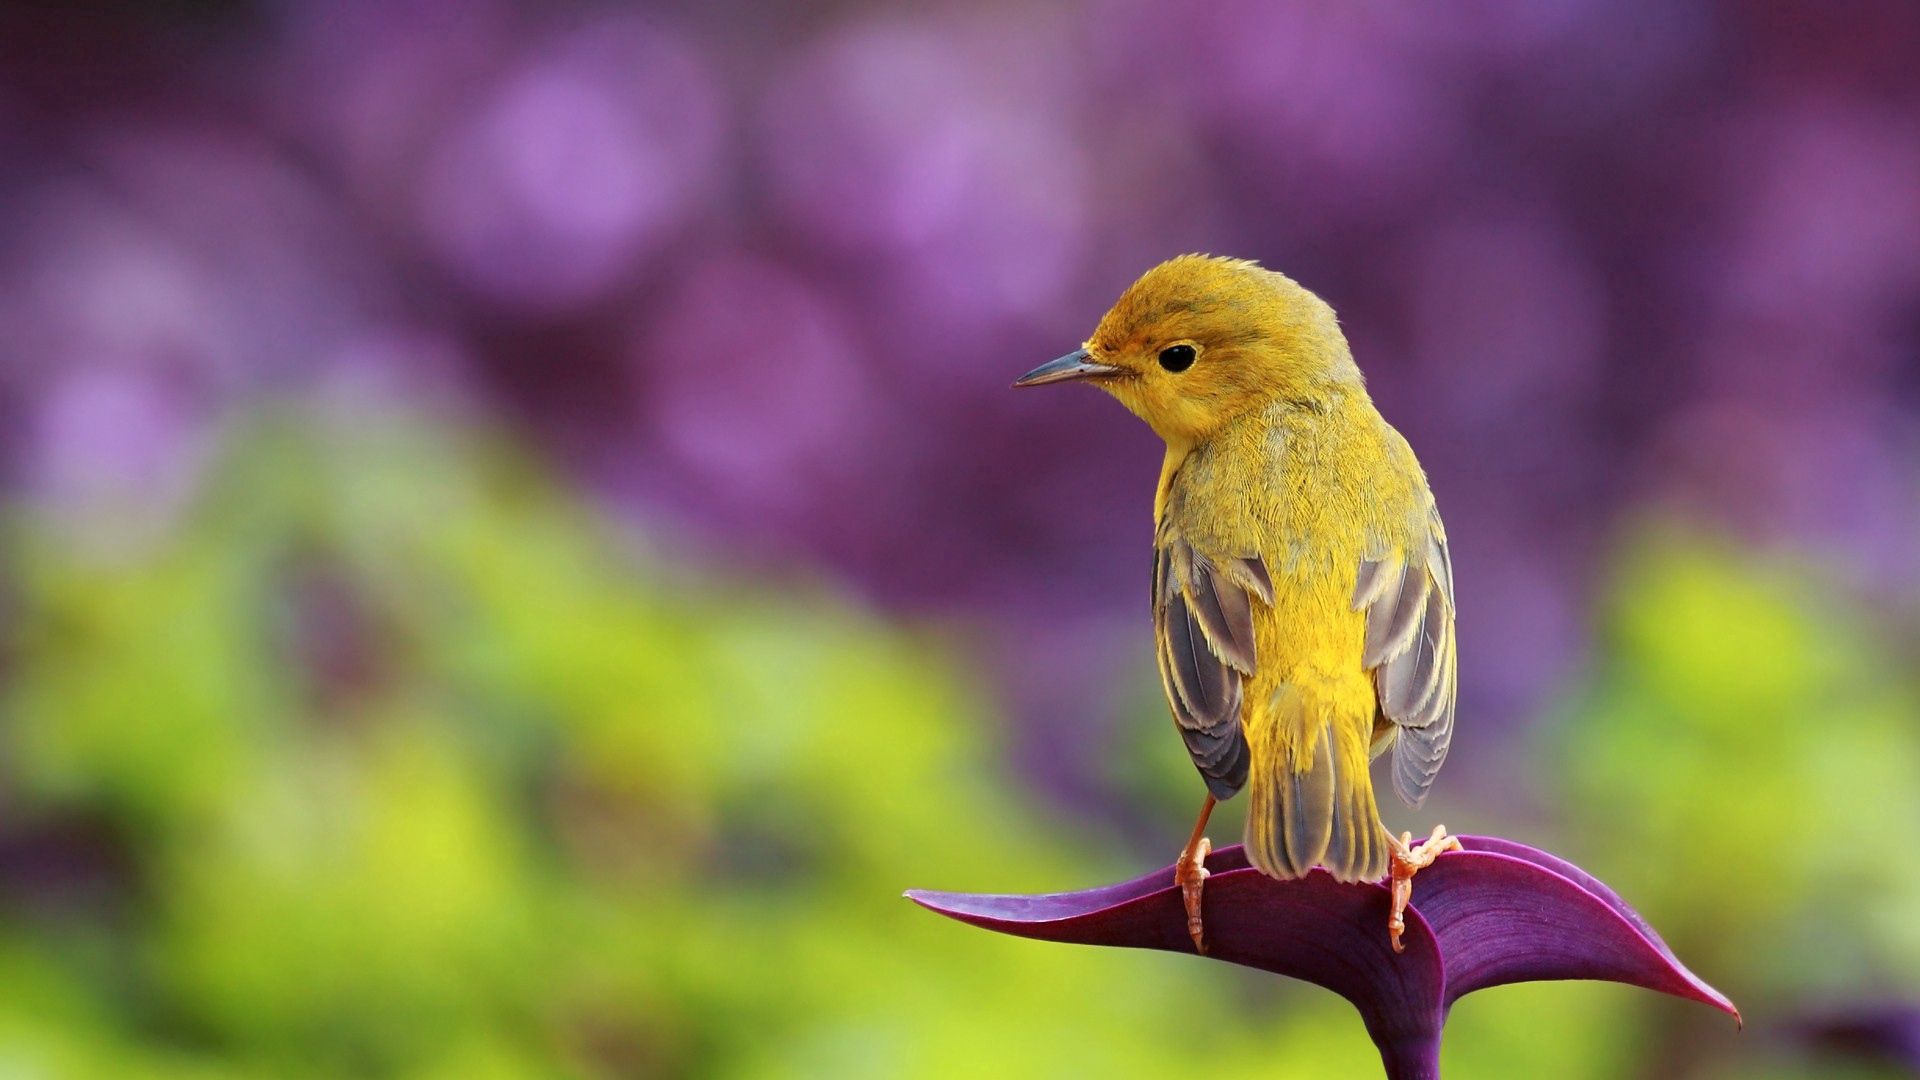 128447 download wallpaper bird, animals, sit, beautiful, branch, color screensavers and pictures for free